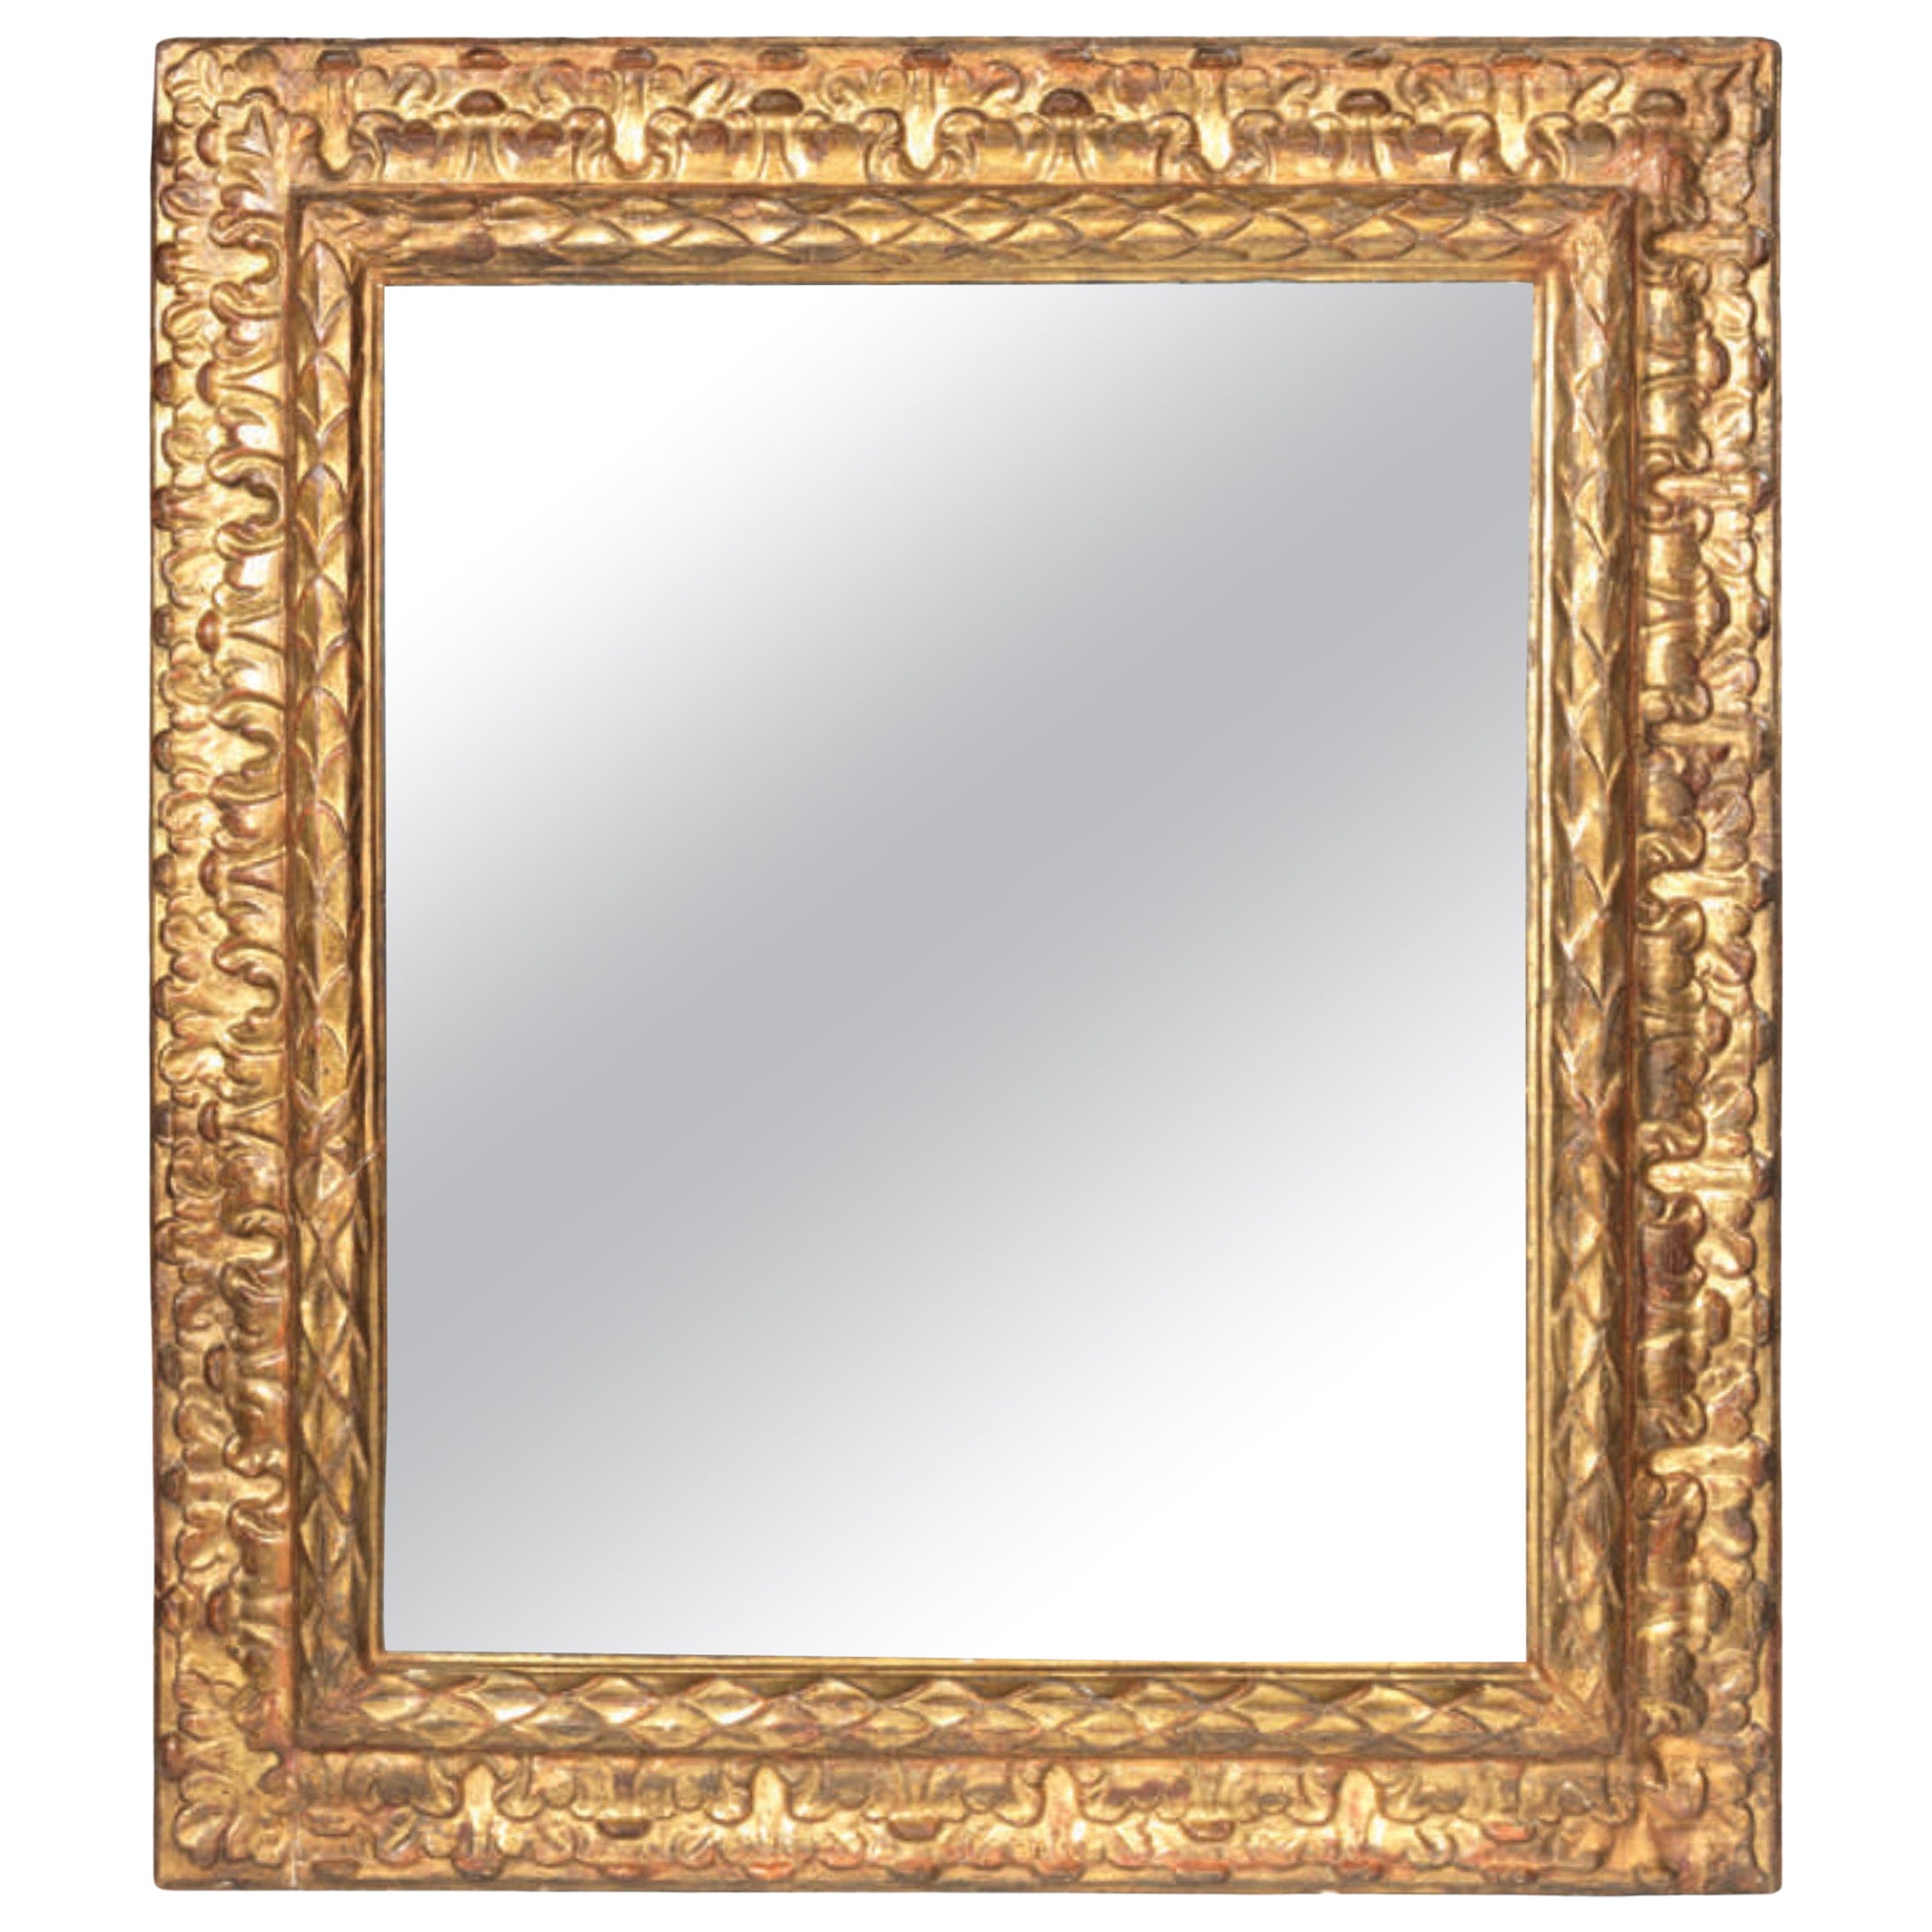 Large Carved and Gilt Miror